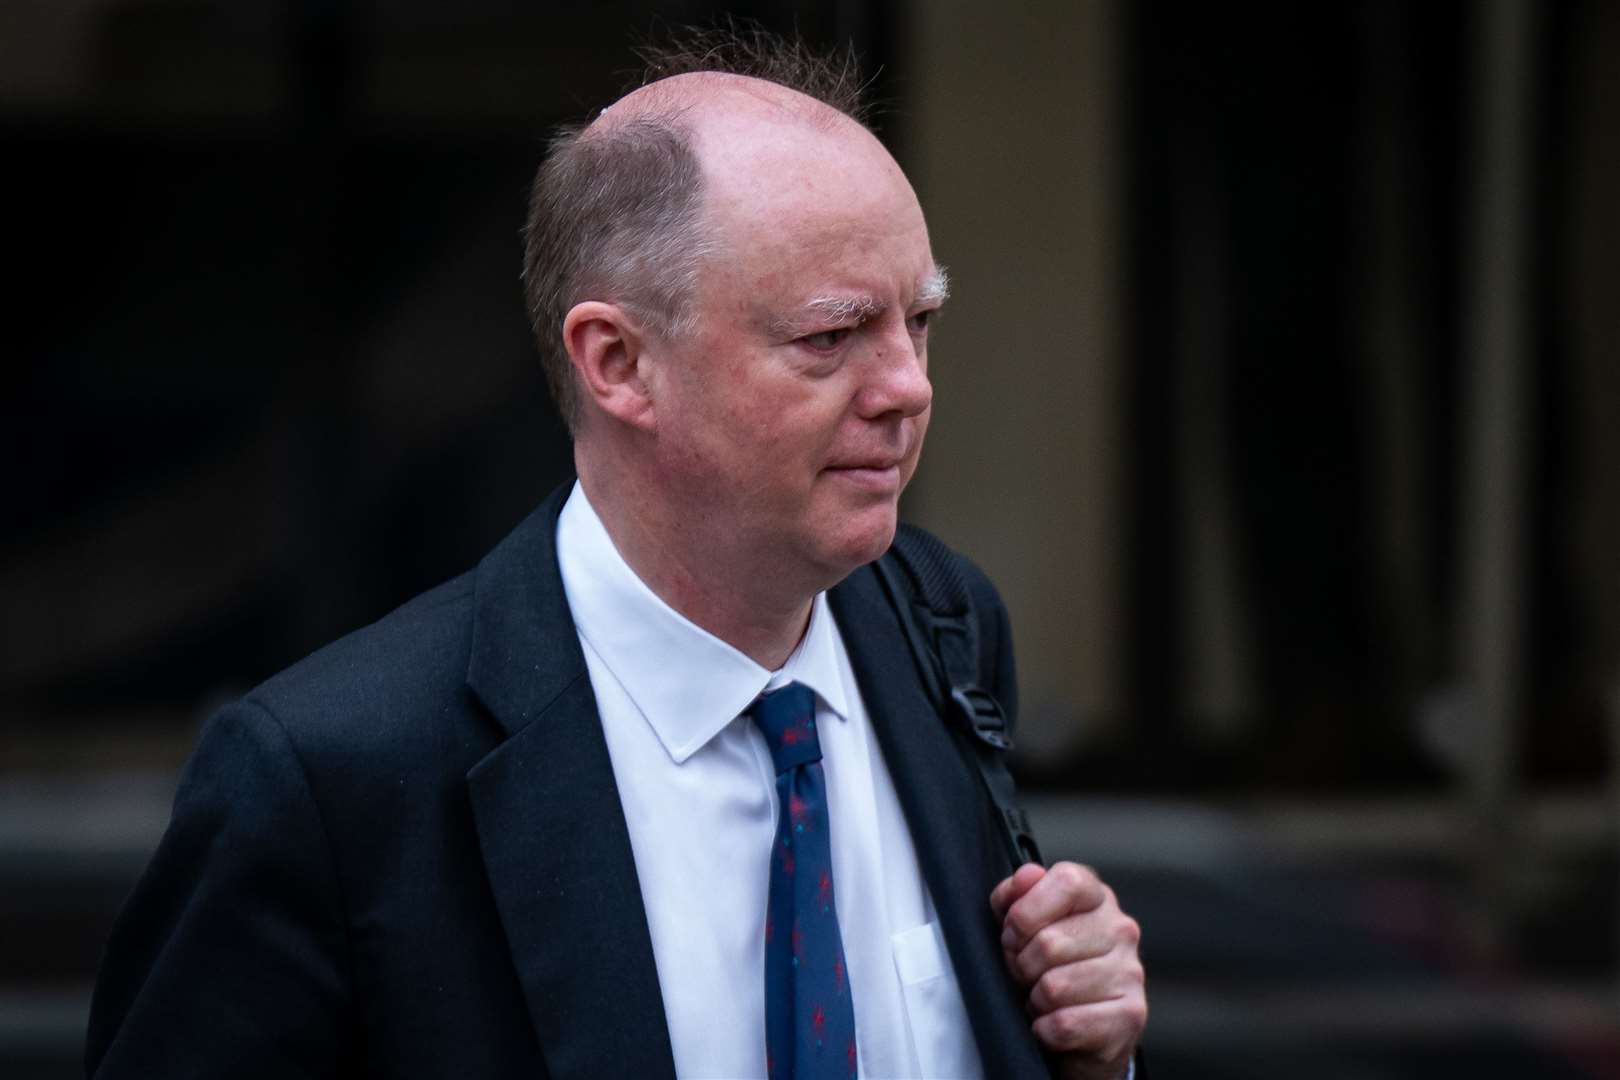 Matt Hancock told the inquiry that Chief Medical Officer Sir Chris Whitty, above, said the scientific consensus in January 2020 was that asymptomatic transmission of the virus was unlikely (PA)